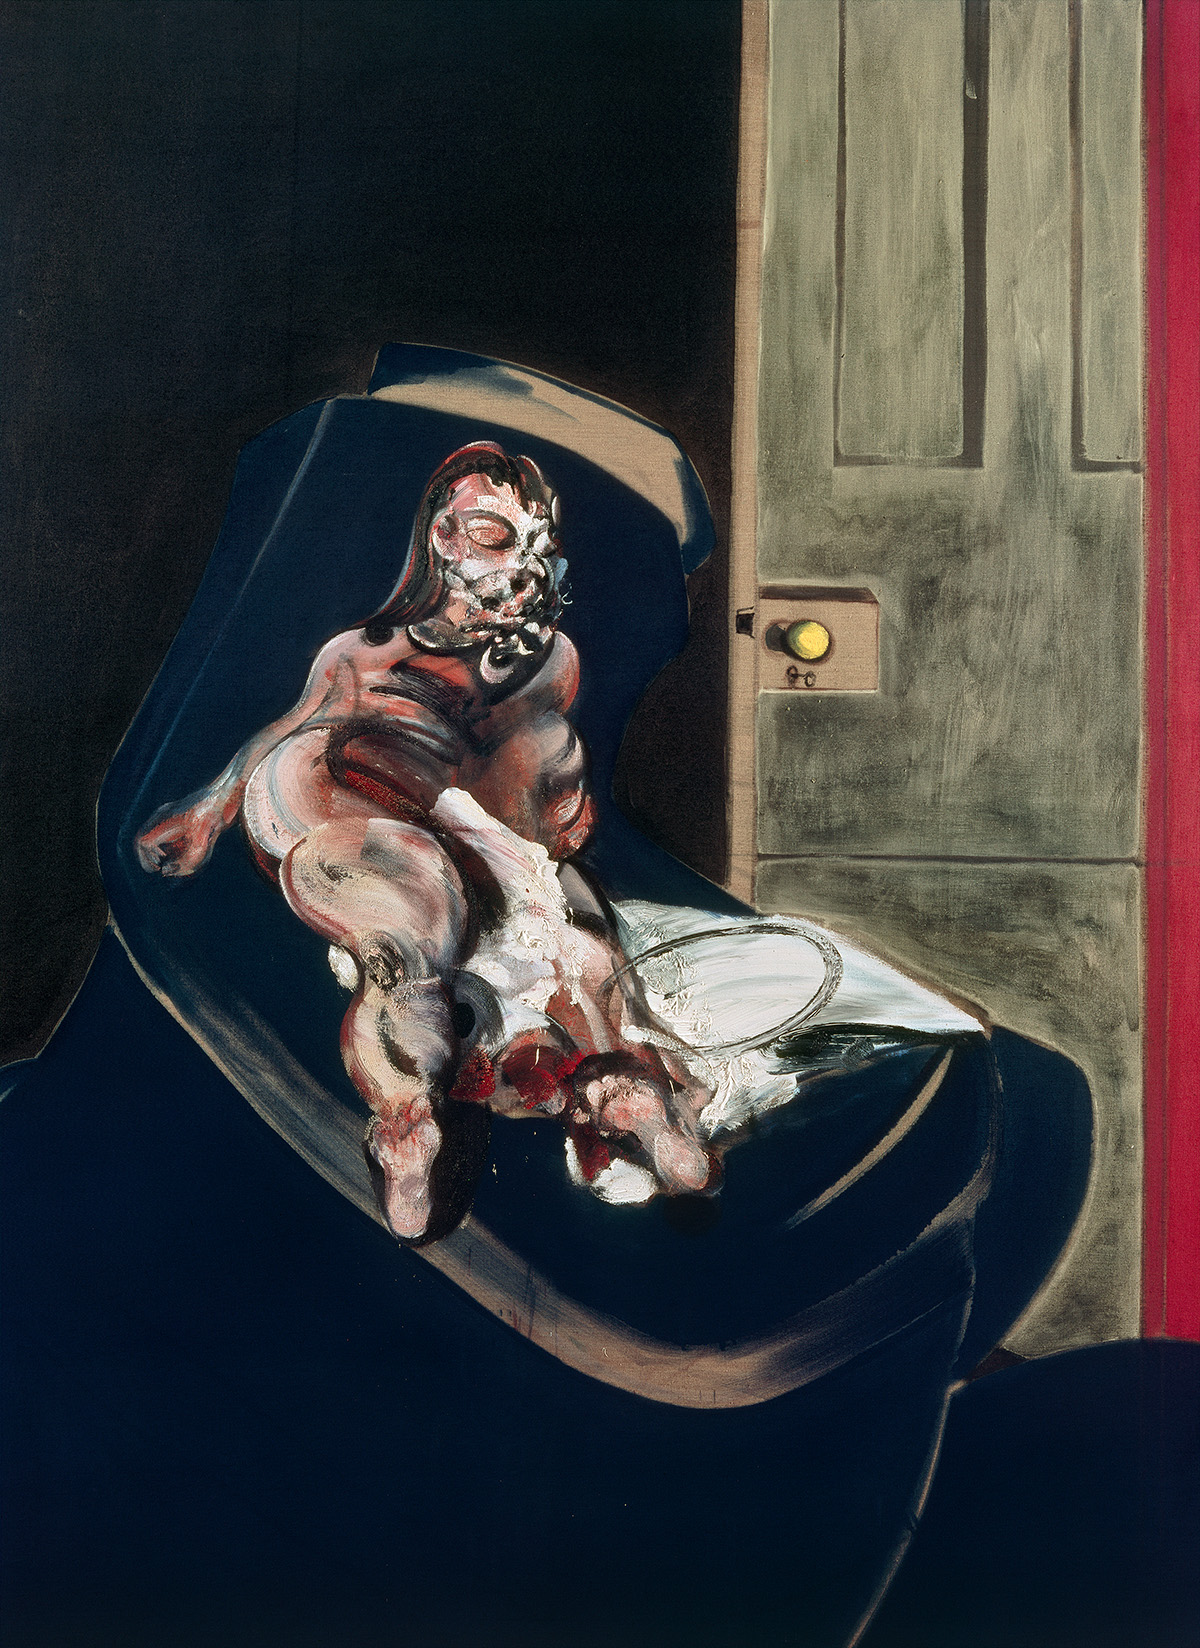 Portrait of Henrietta Moraes on a Blue Couch, 1965. Oil on canvas. CR no. 65-08. © The Estate of Francis Bacon / DACS London 2022. All rights reserved.